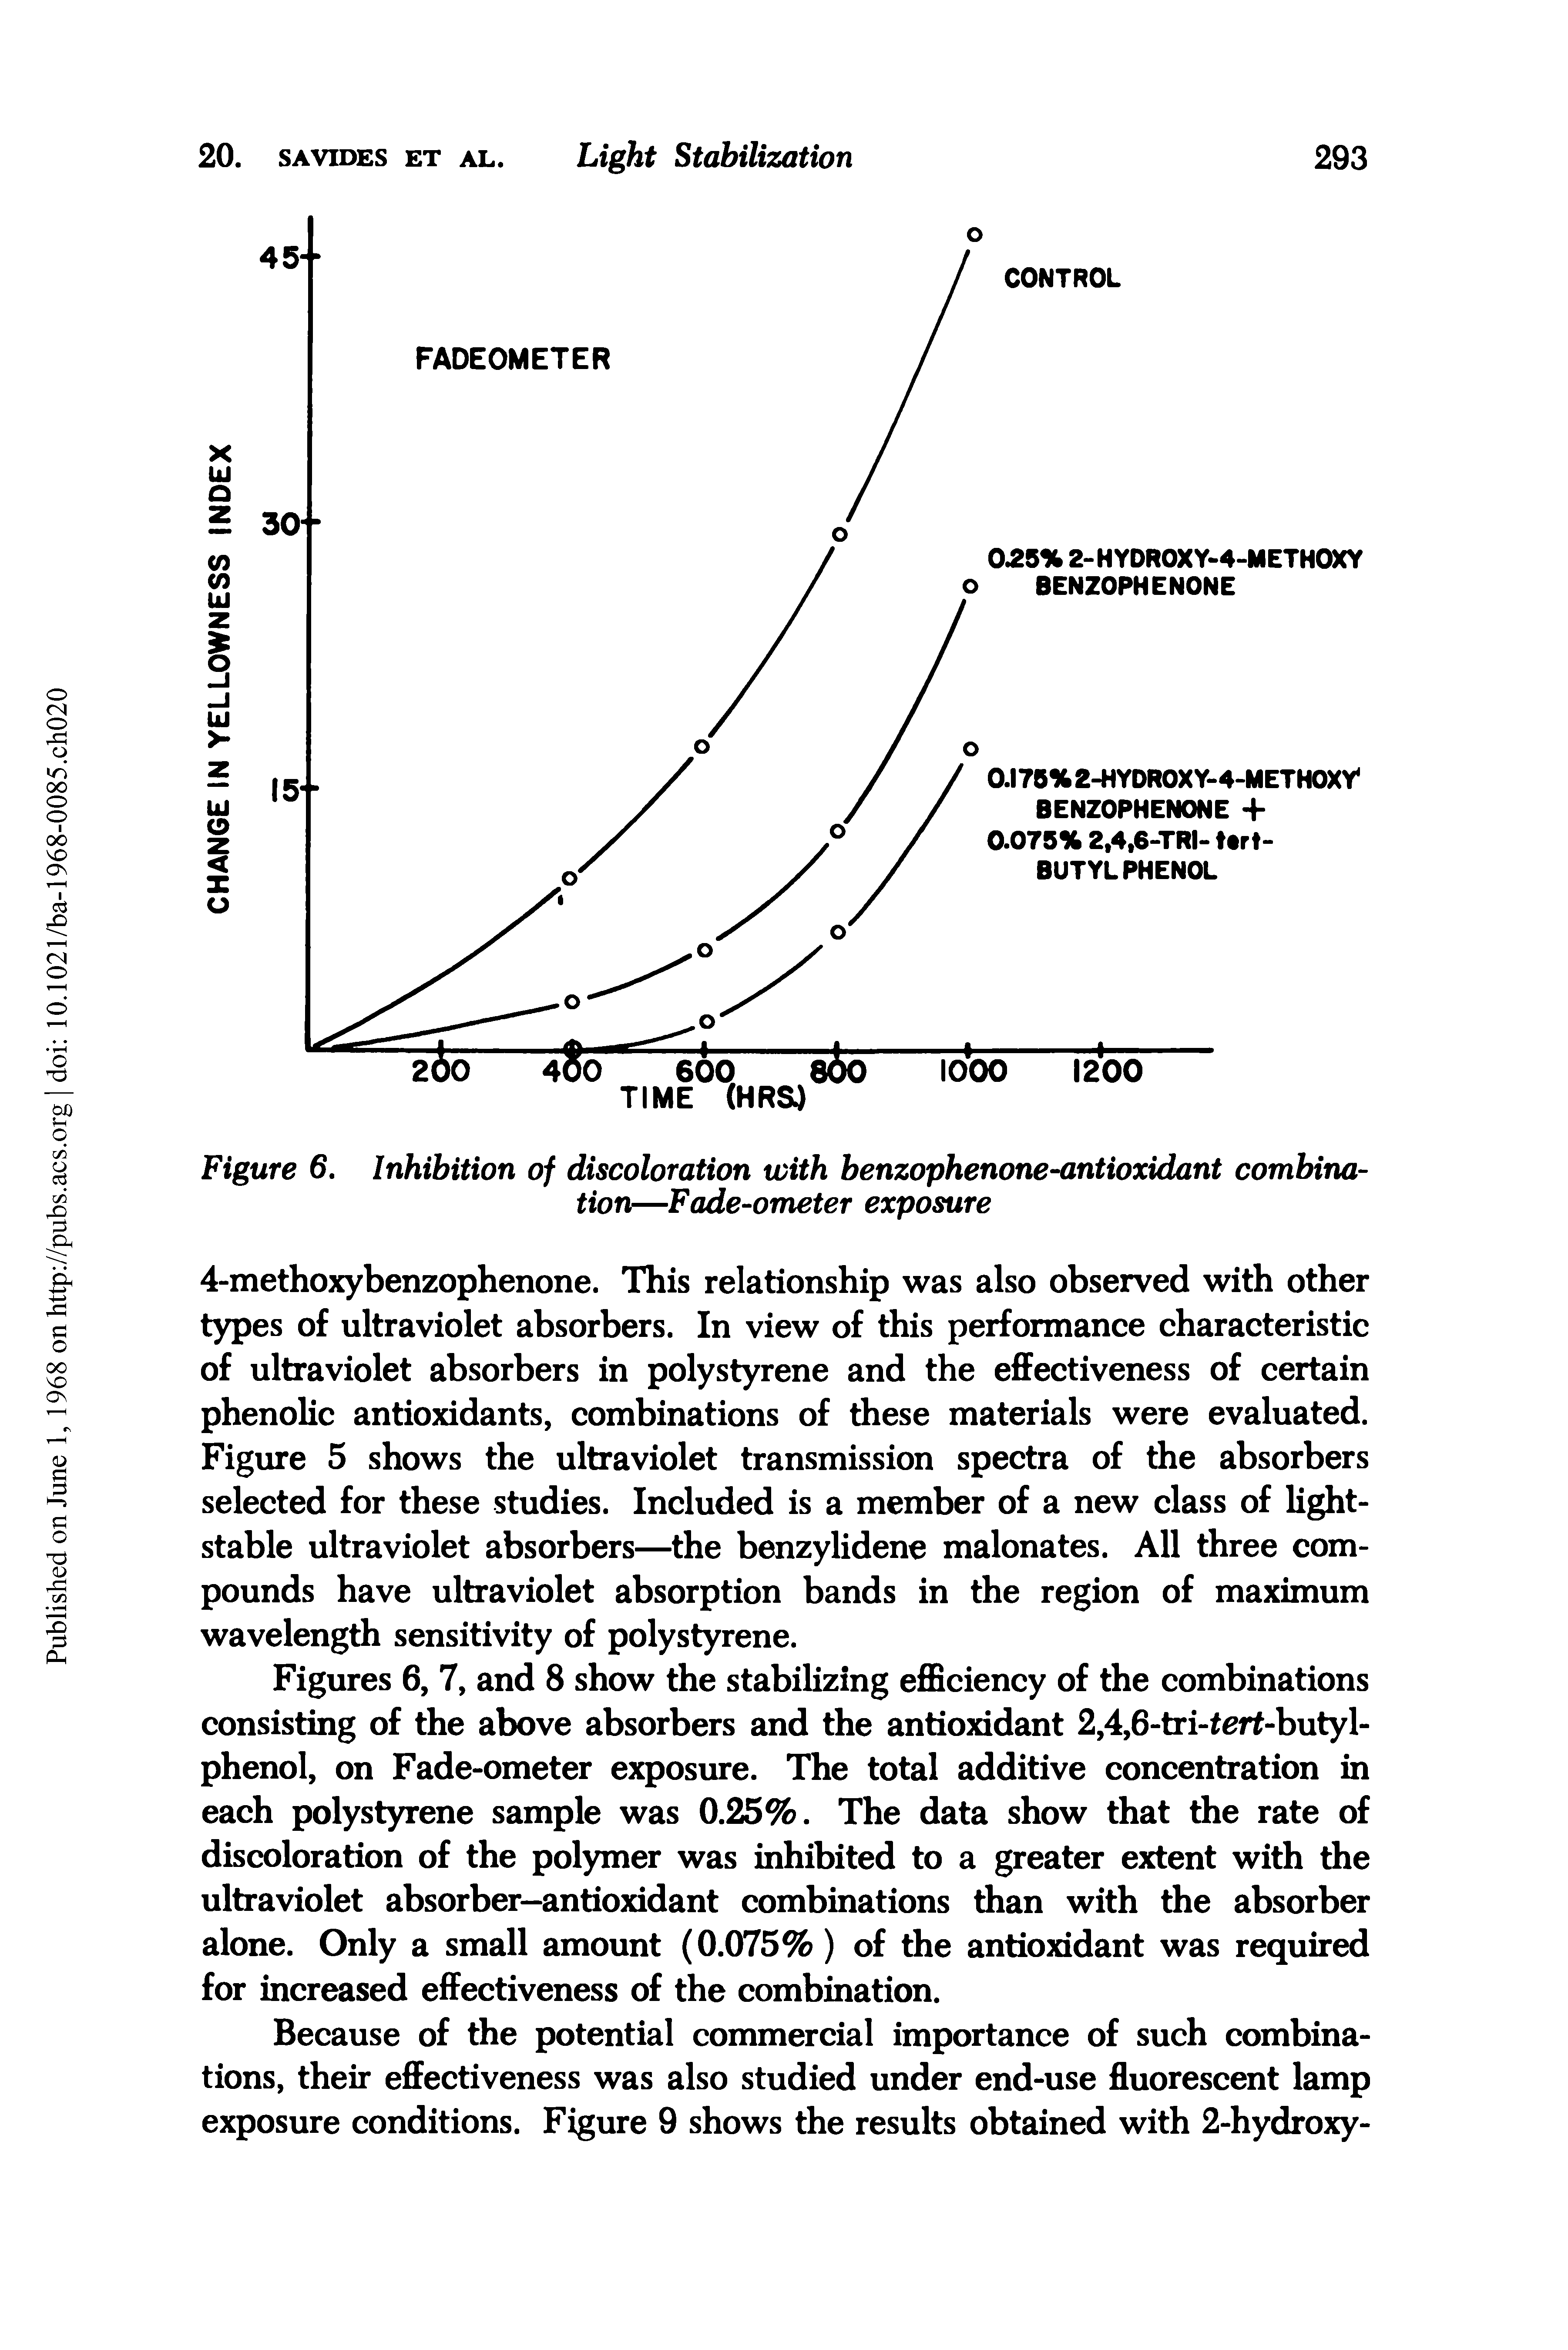 Figures 6, 7, and 8 show the stabilizing efficiency of the combinations consisting of the above absorbers and the antioxidant 2,4,6-tri-fert-butyl-phenol, on Fade-ometer exposure. The total additive concentration in each polystyrene sample was 0.25%. The data show that the rate of discoloration of the polymer was inhibited to a greater extent with the ultraviolet absorber-antioxidant combinations than with the absorber alone. Only a small amount (0.075%) of the antioxidant was required for increased effectiveness of the combination.